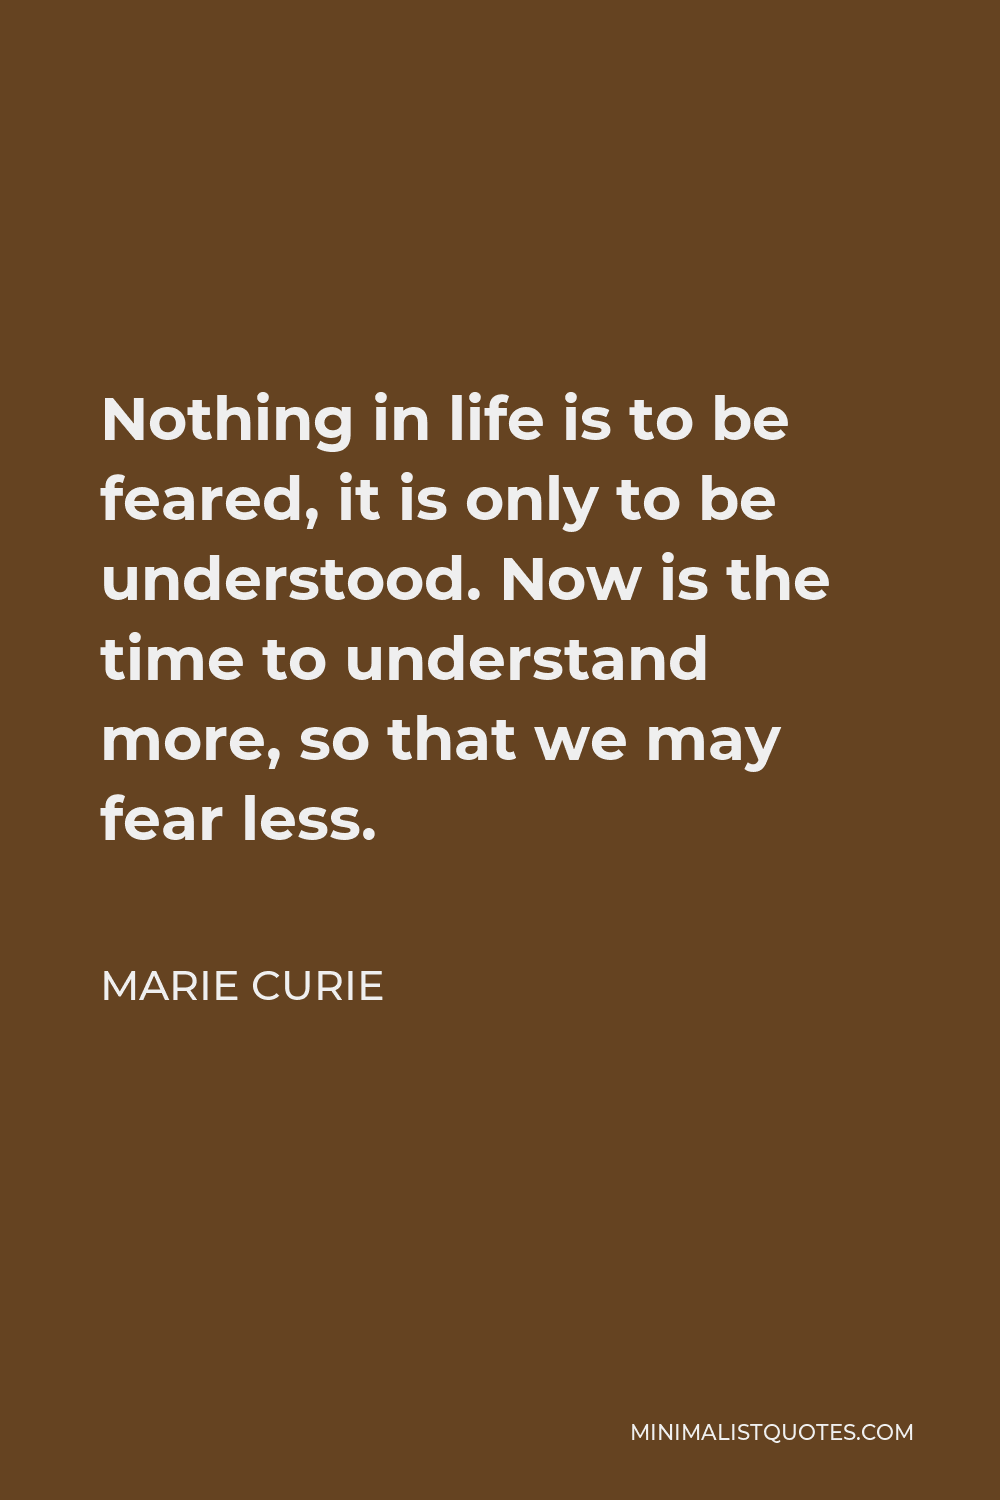 Marie Curie Quote - Nothing in life is to be feared, it is only to be understood. Now is the time to understand more, so that we may fear less.